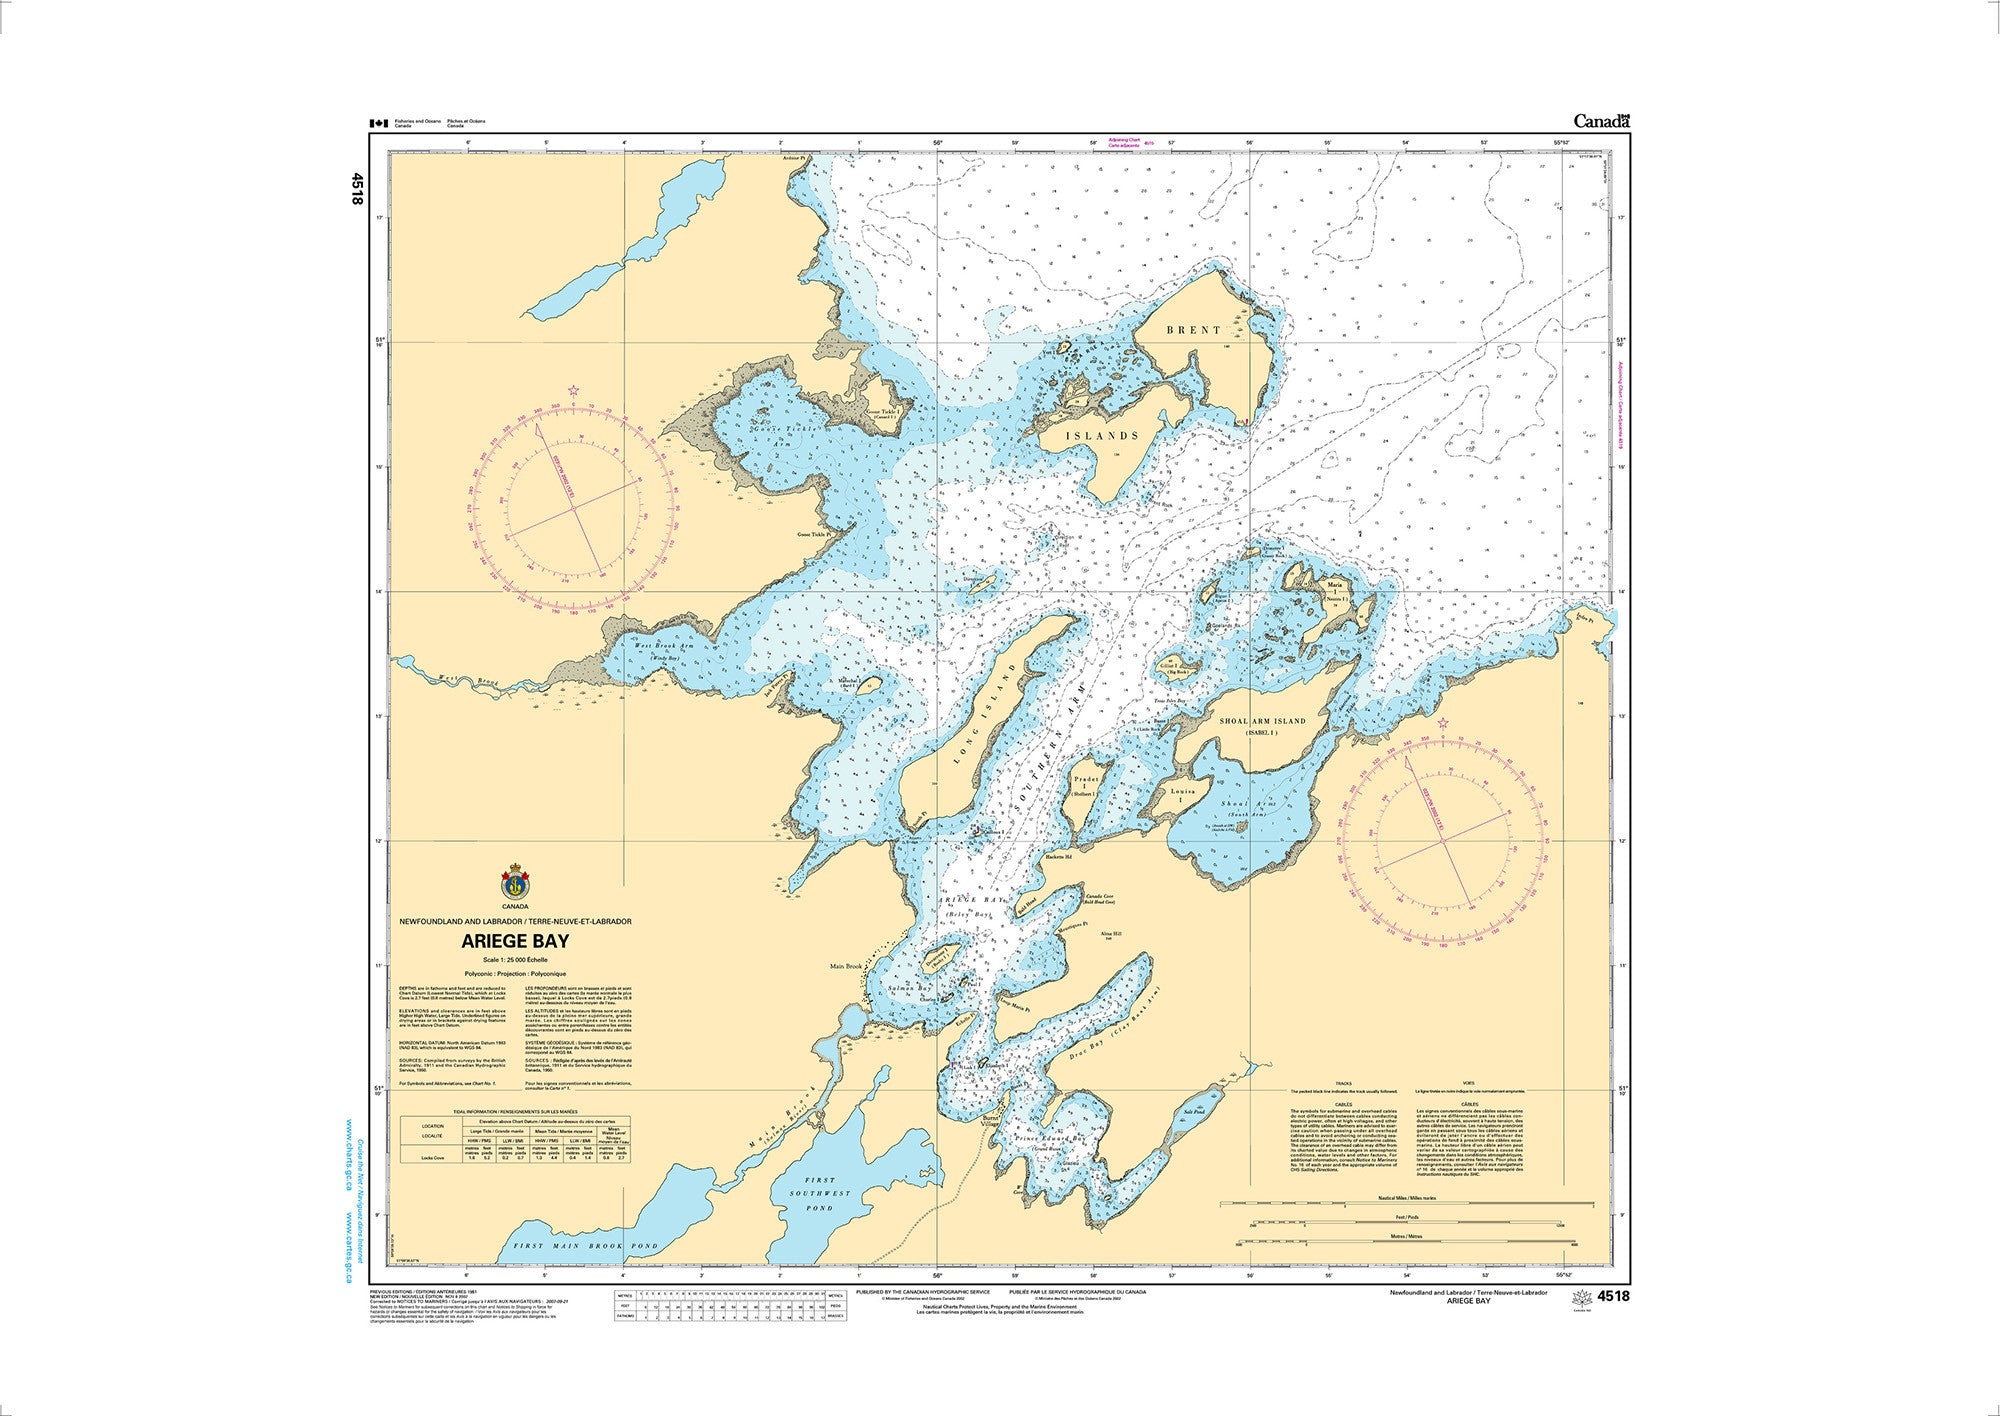 Canadian Hydrographic Service Nautical Chart CHS4518: Ariege Bay